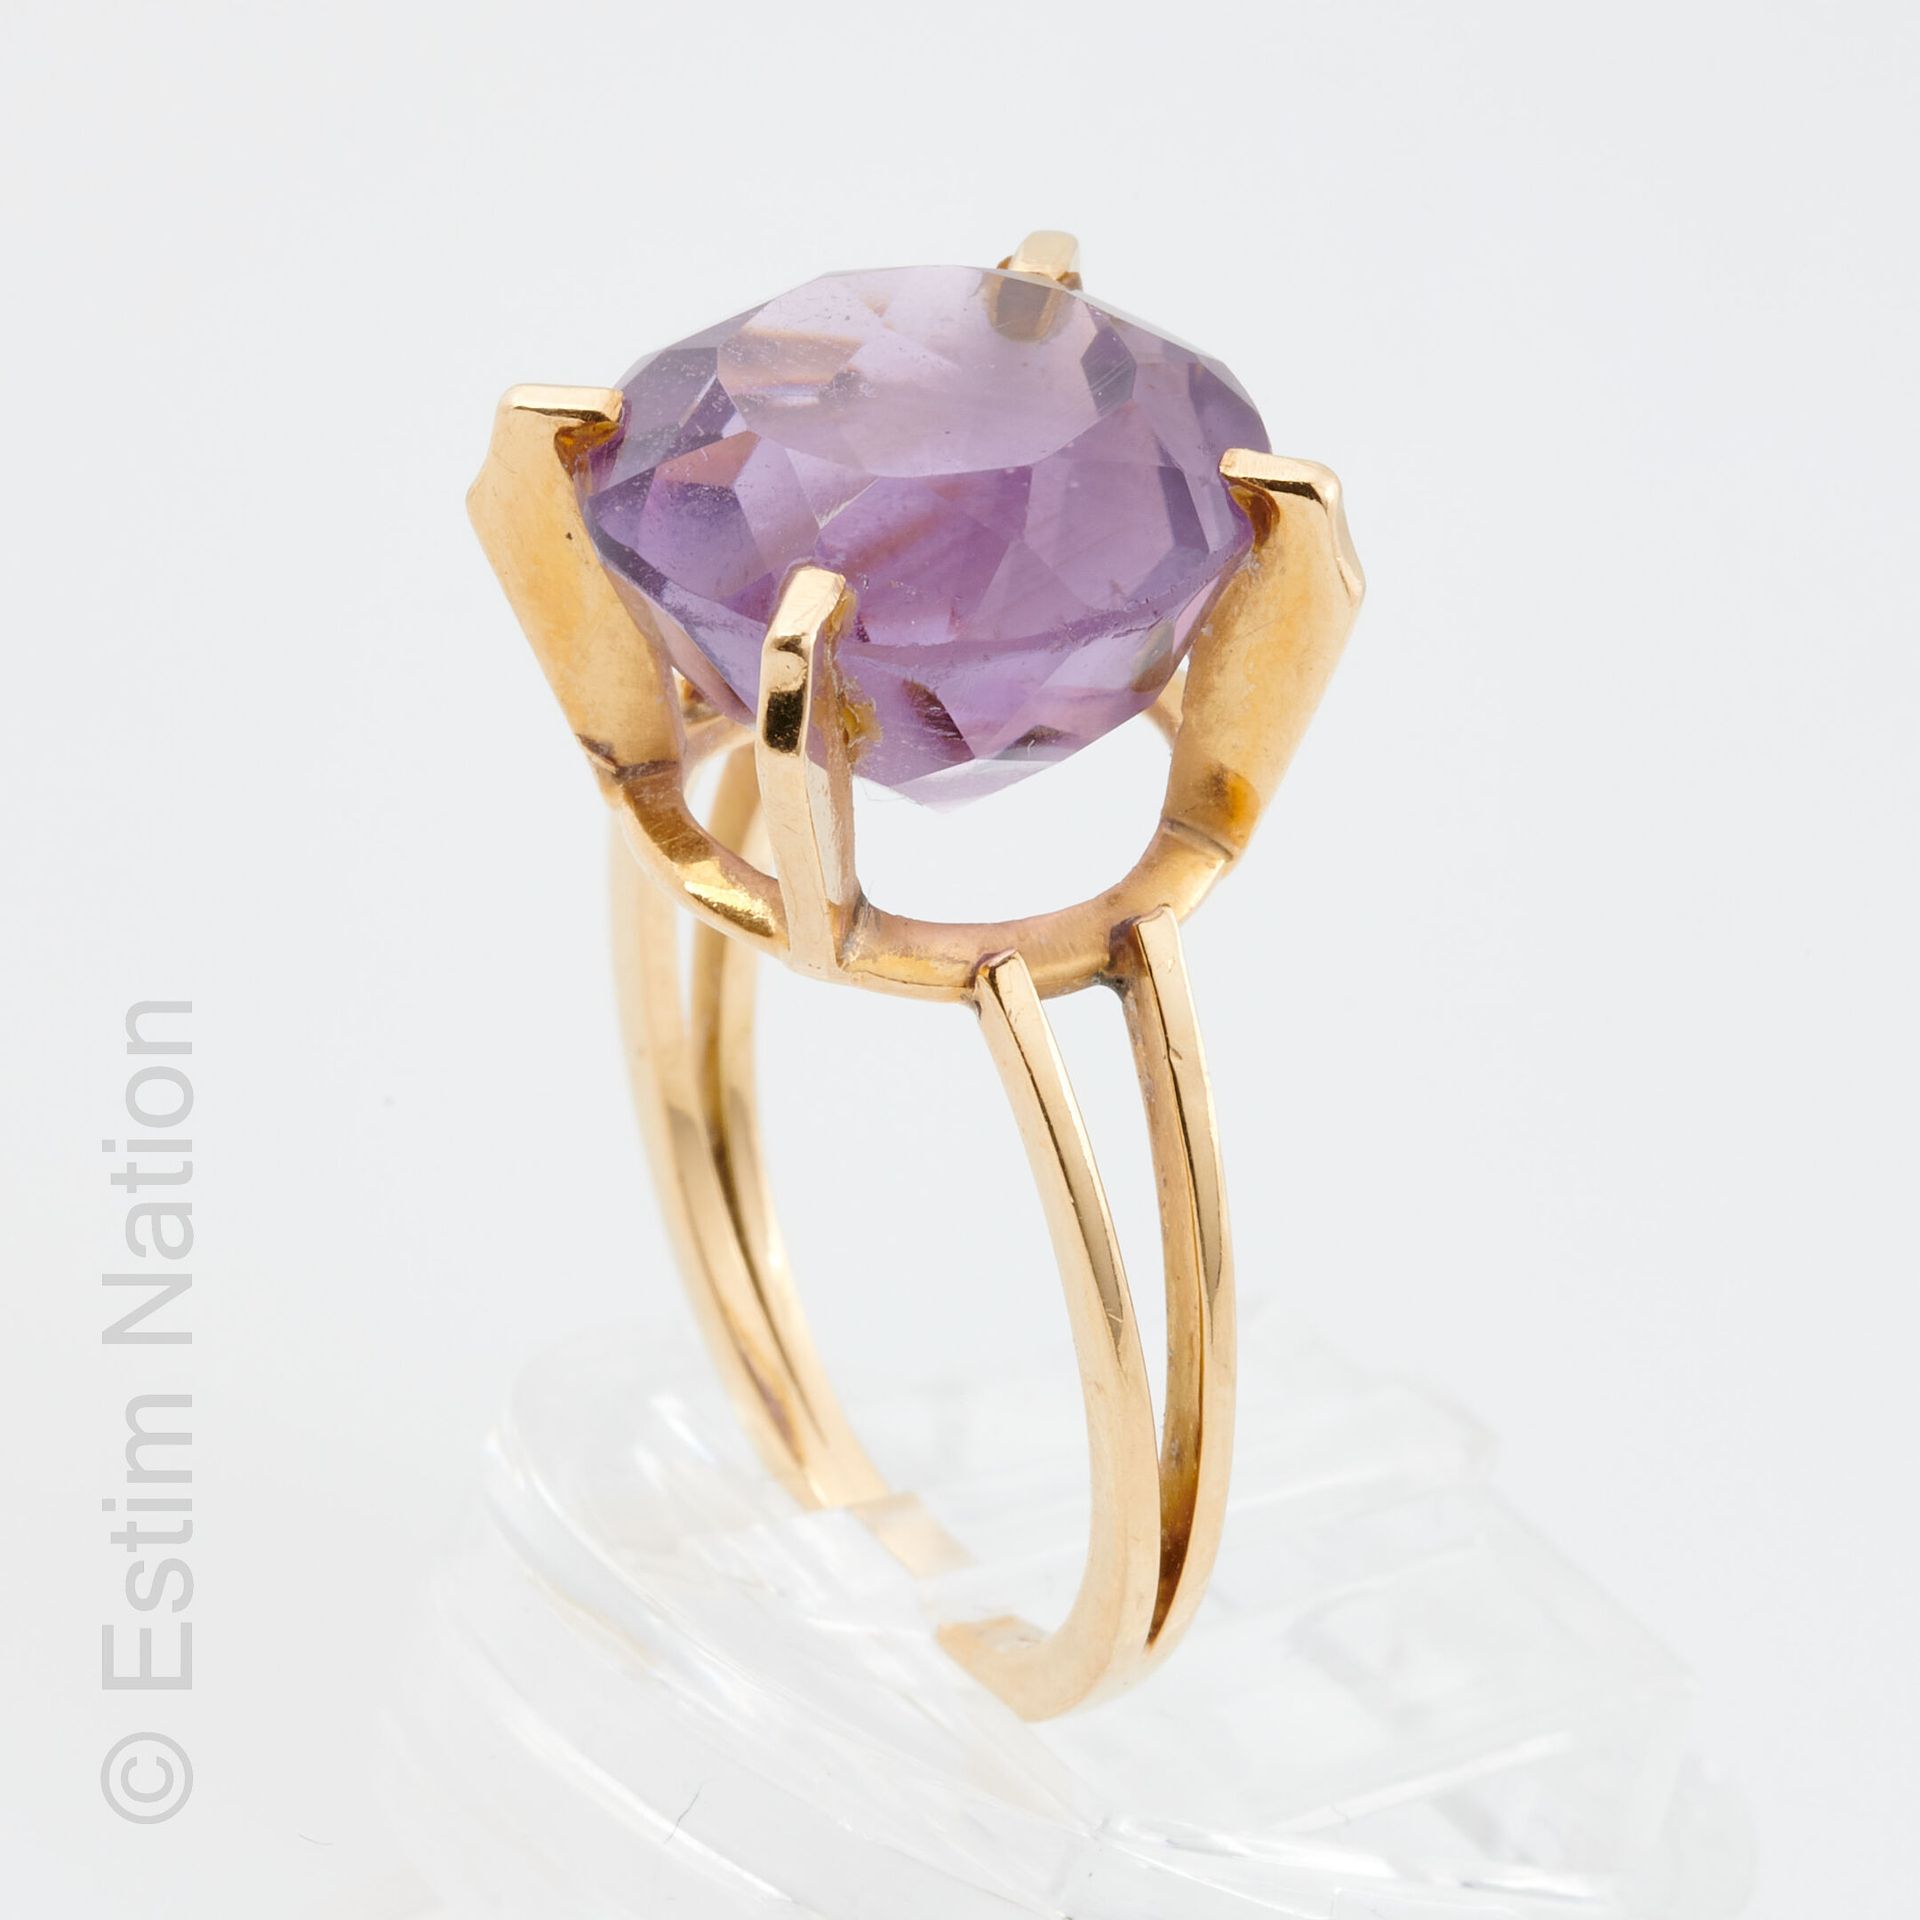 BAGUE OR JAUNE ET AMETHYSTE Ring in 18K (750 thousandths) yellow gold, set with &hellip;